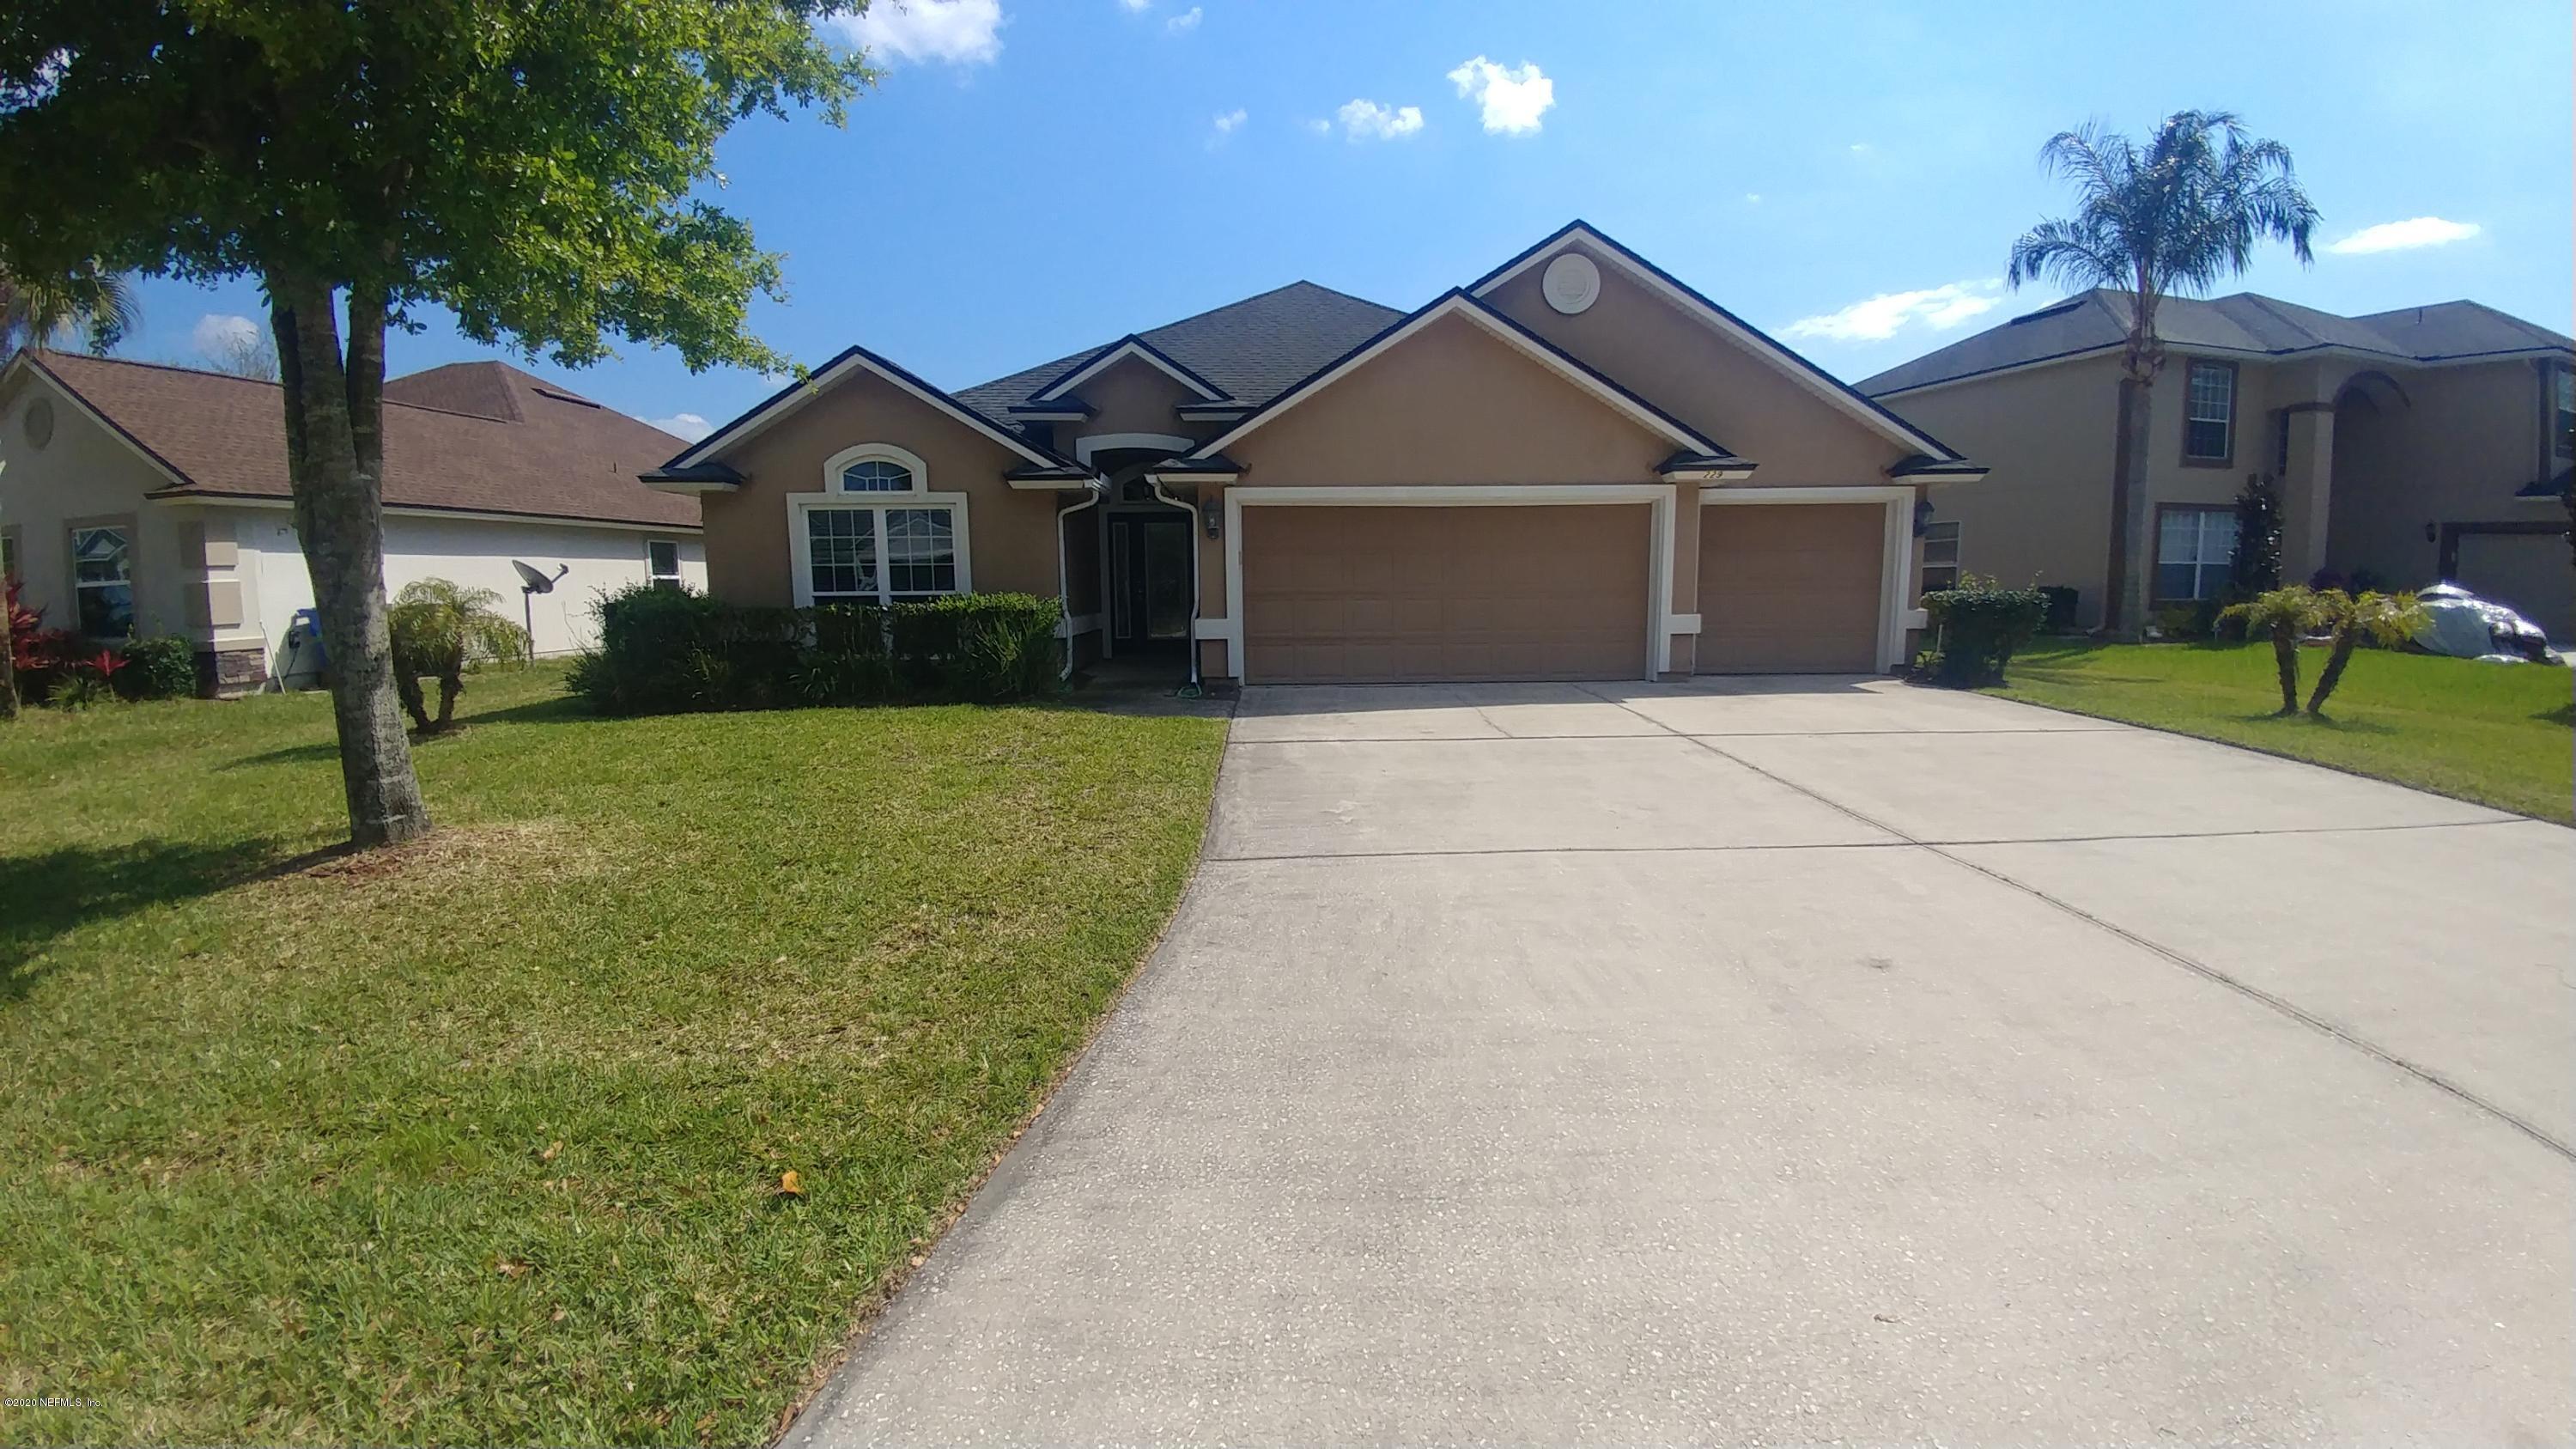 St Johns, FL home for sale located at 229 MAHOGANY BAY Drive, St Johns, FL 32259